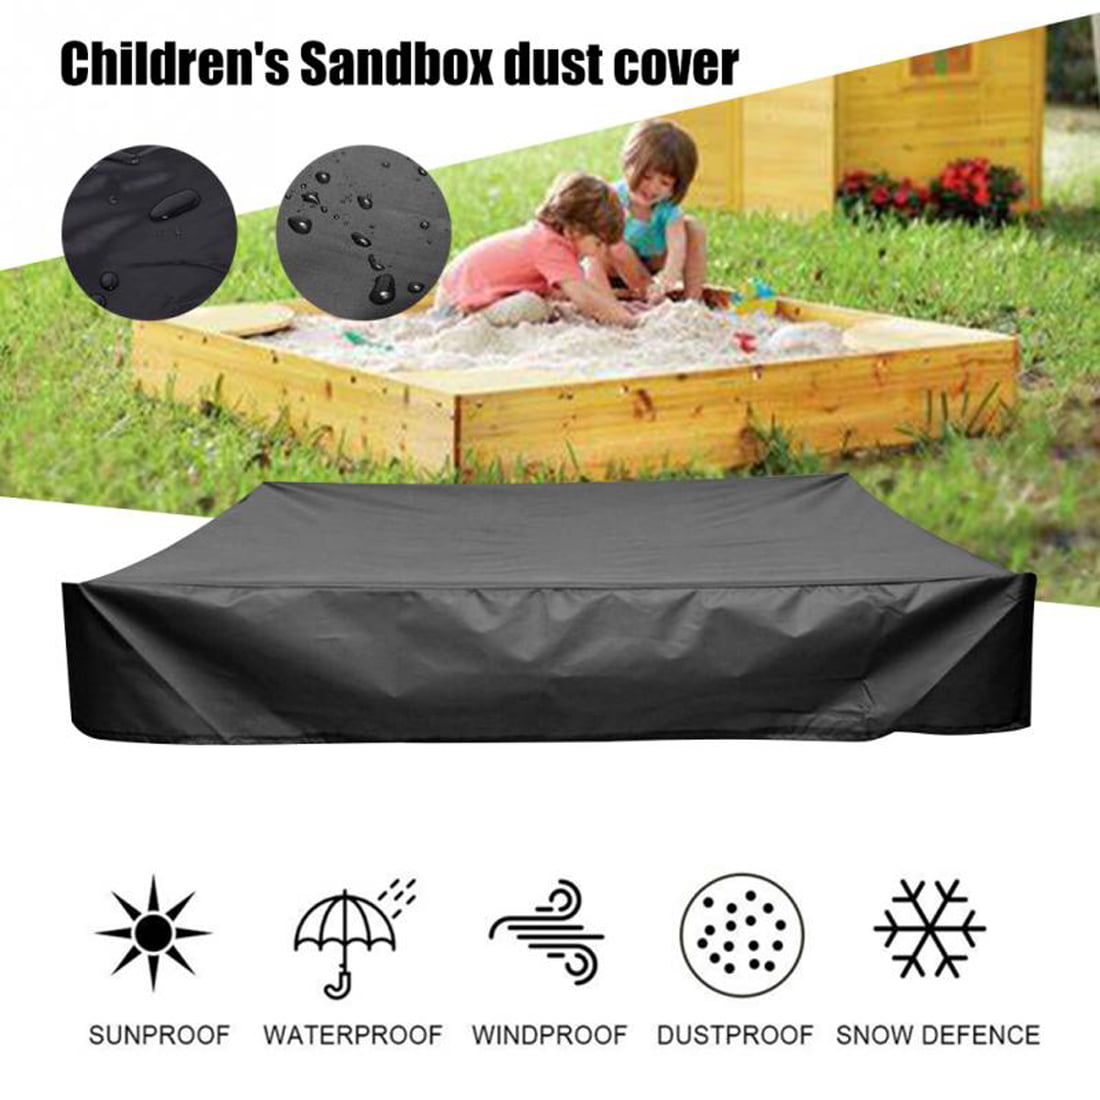 120X120cm Sandbox Cover Waterproof Sandbox Cover with Drawstring Green Square Dustproof Polyester Sandpit Sandbox Cover Beach Sandbox Canopy Cover for Kids Toy Protection Outdoor Garden 